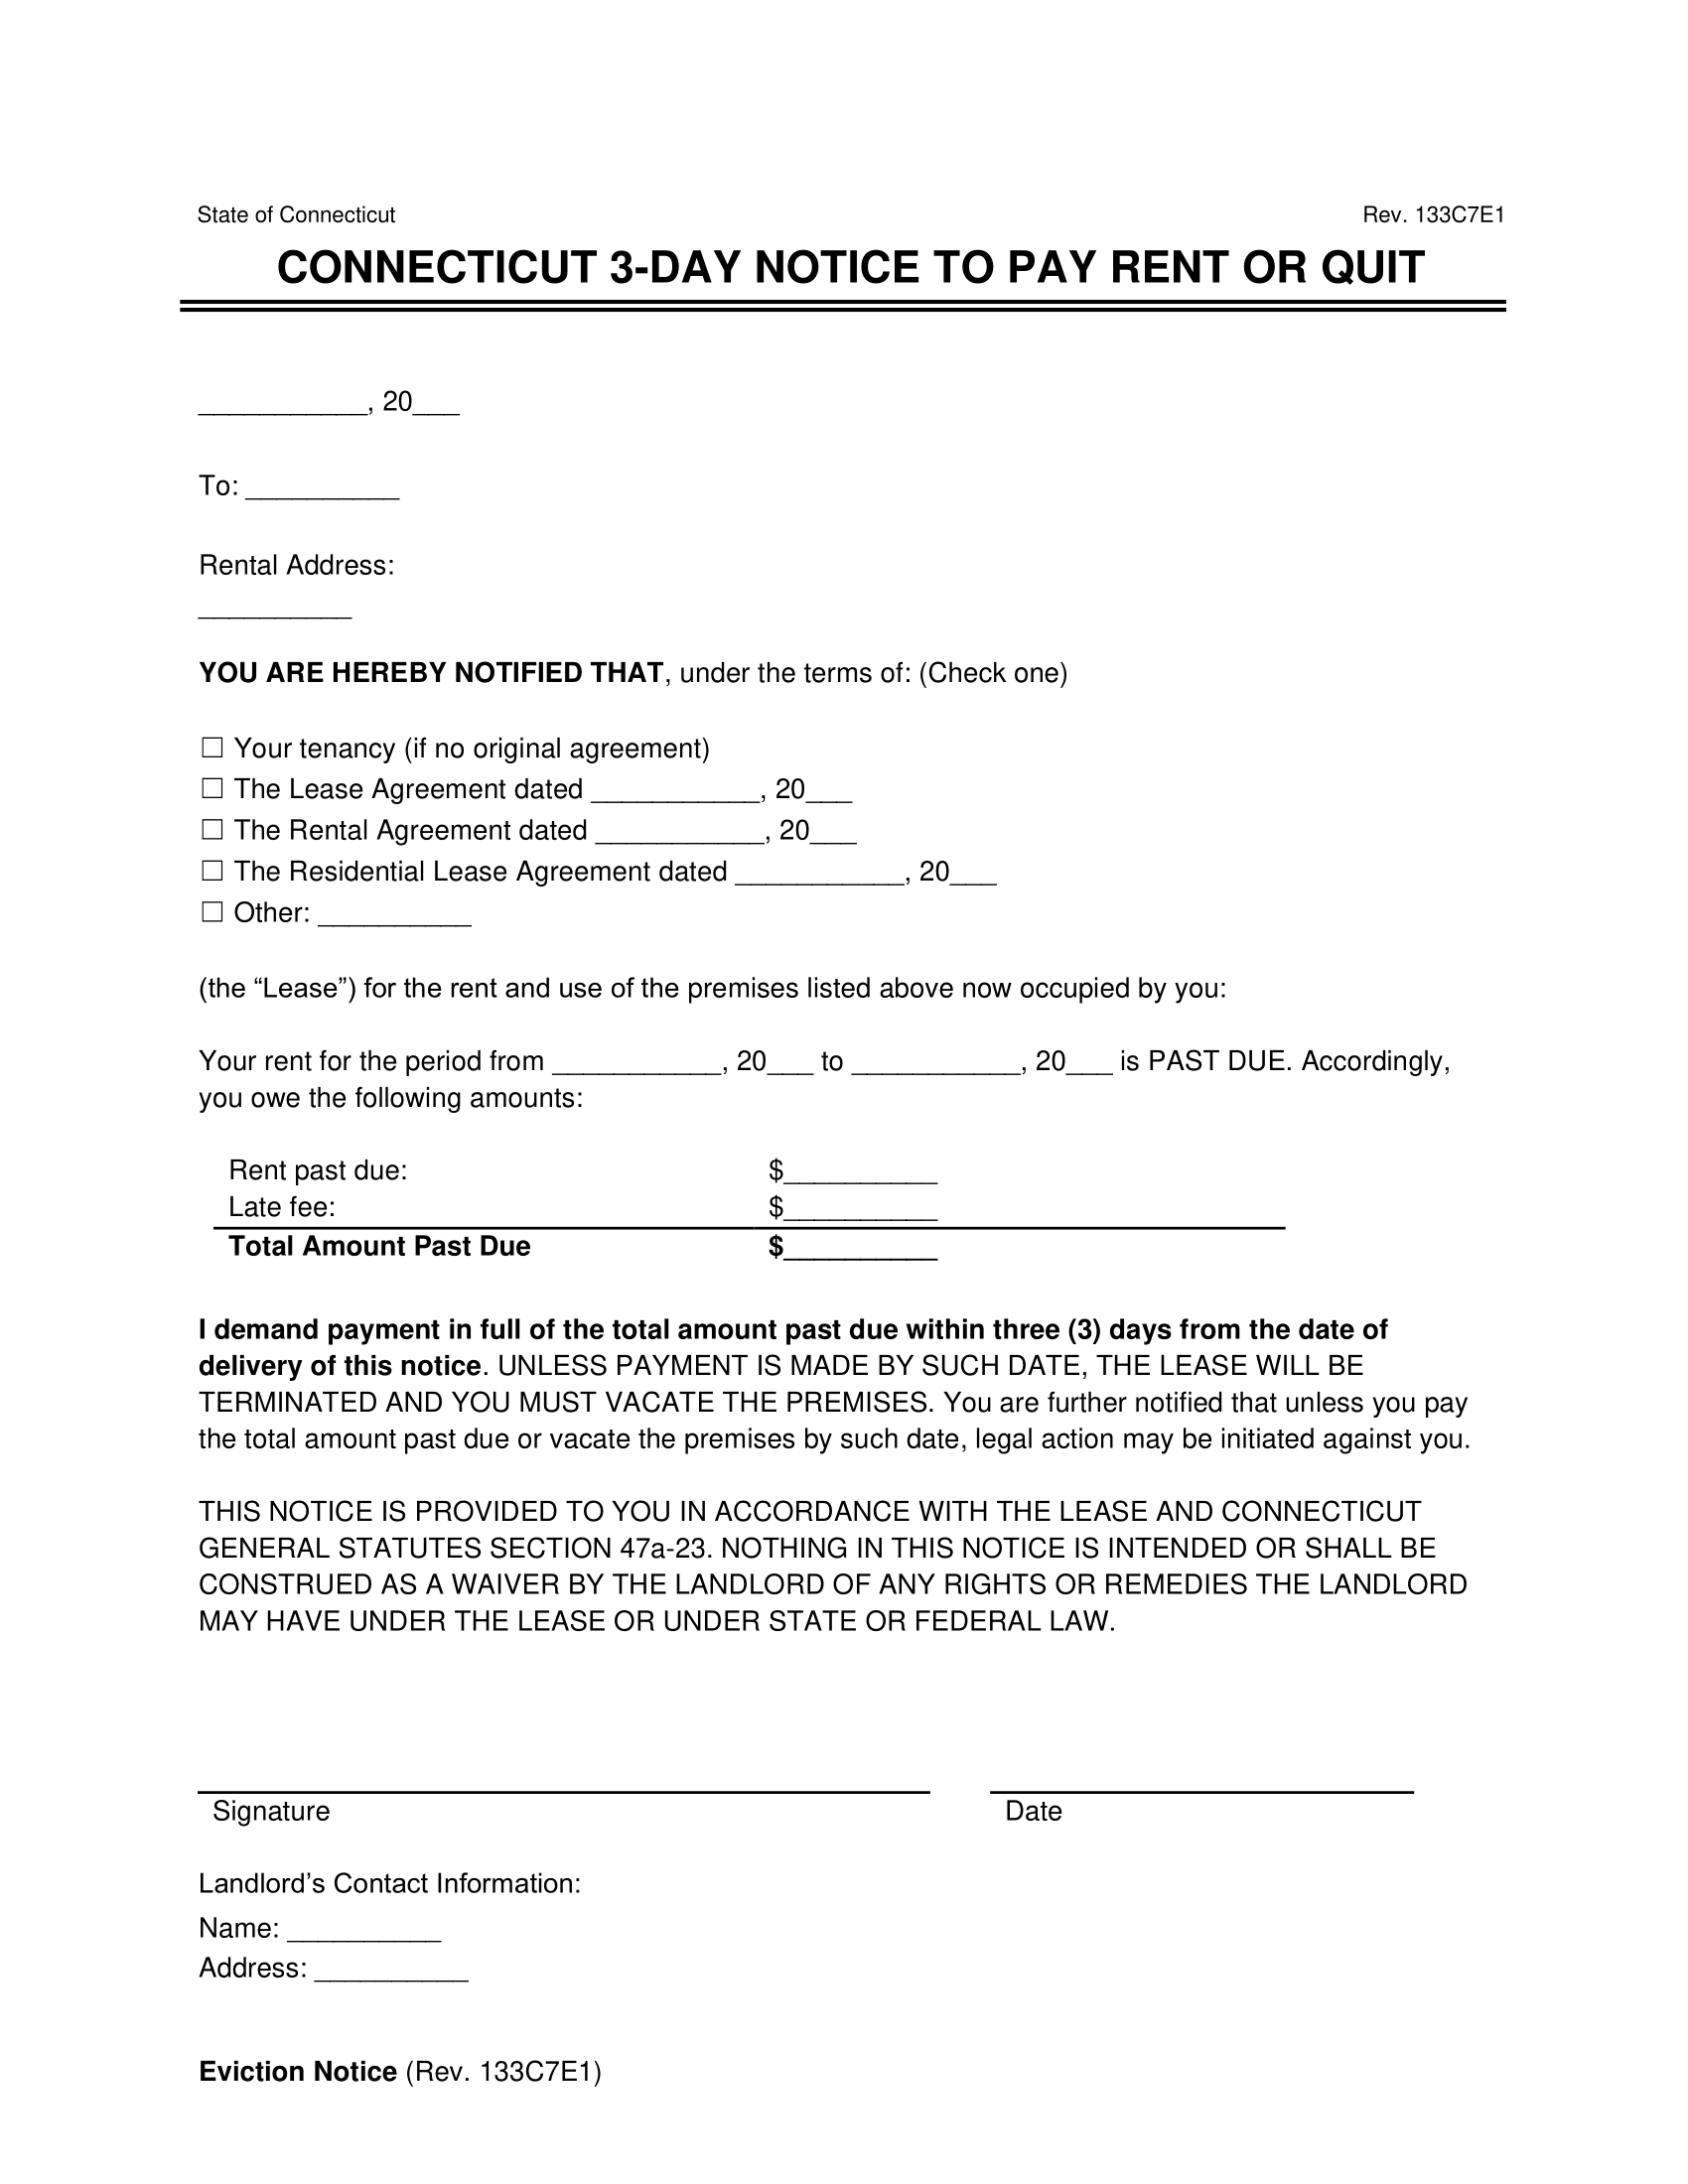 Connecticut 3-Day Notice to Quit for Non-Payment of Rent